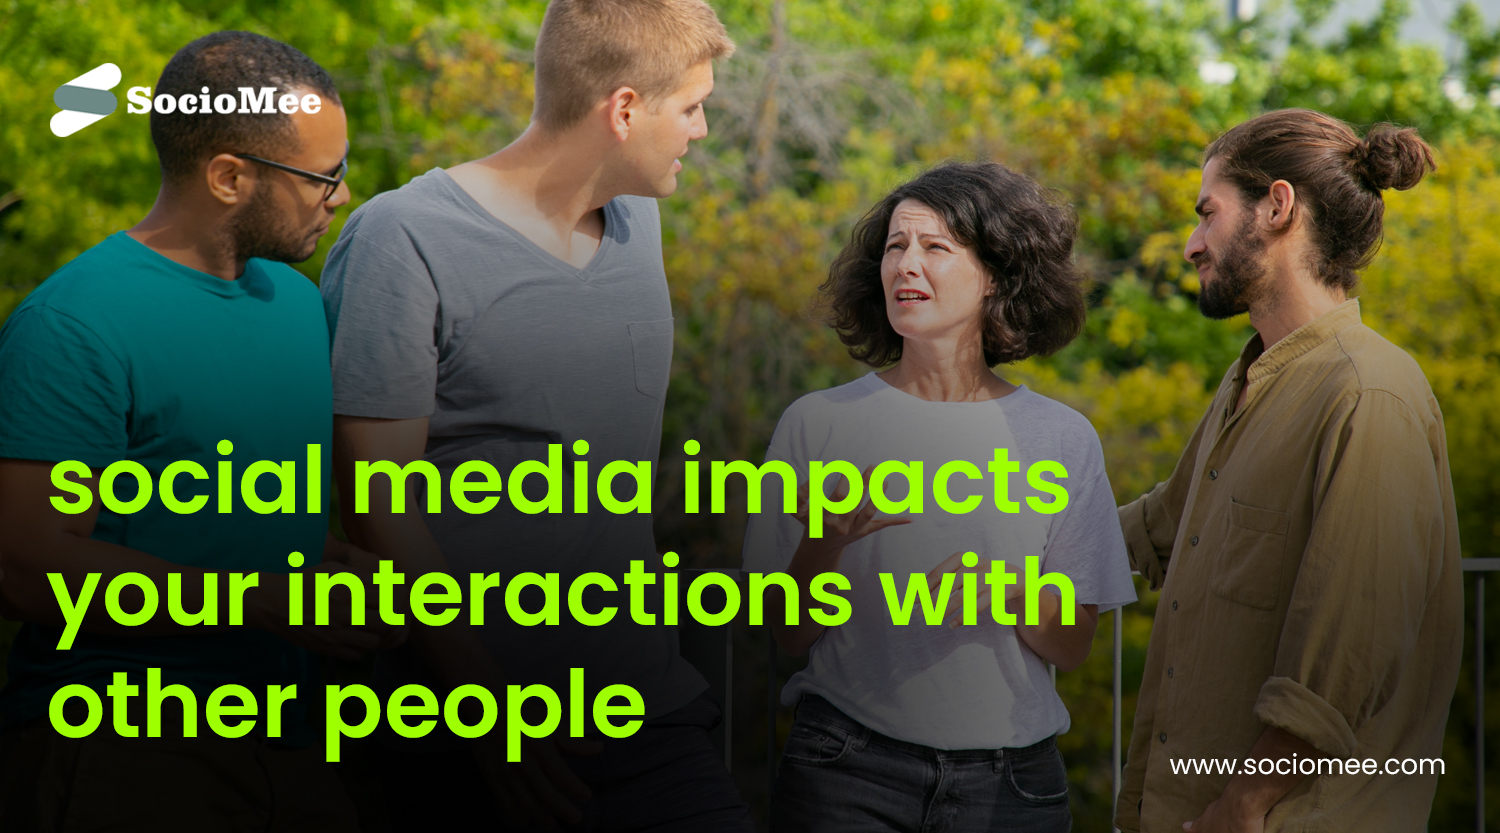 Ways in which social media impacts your interactions with other people